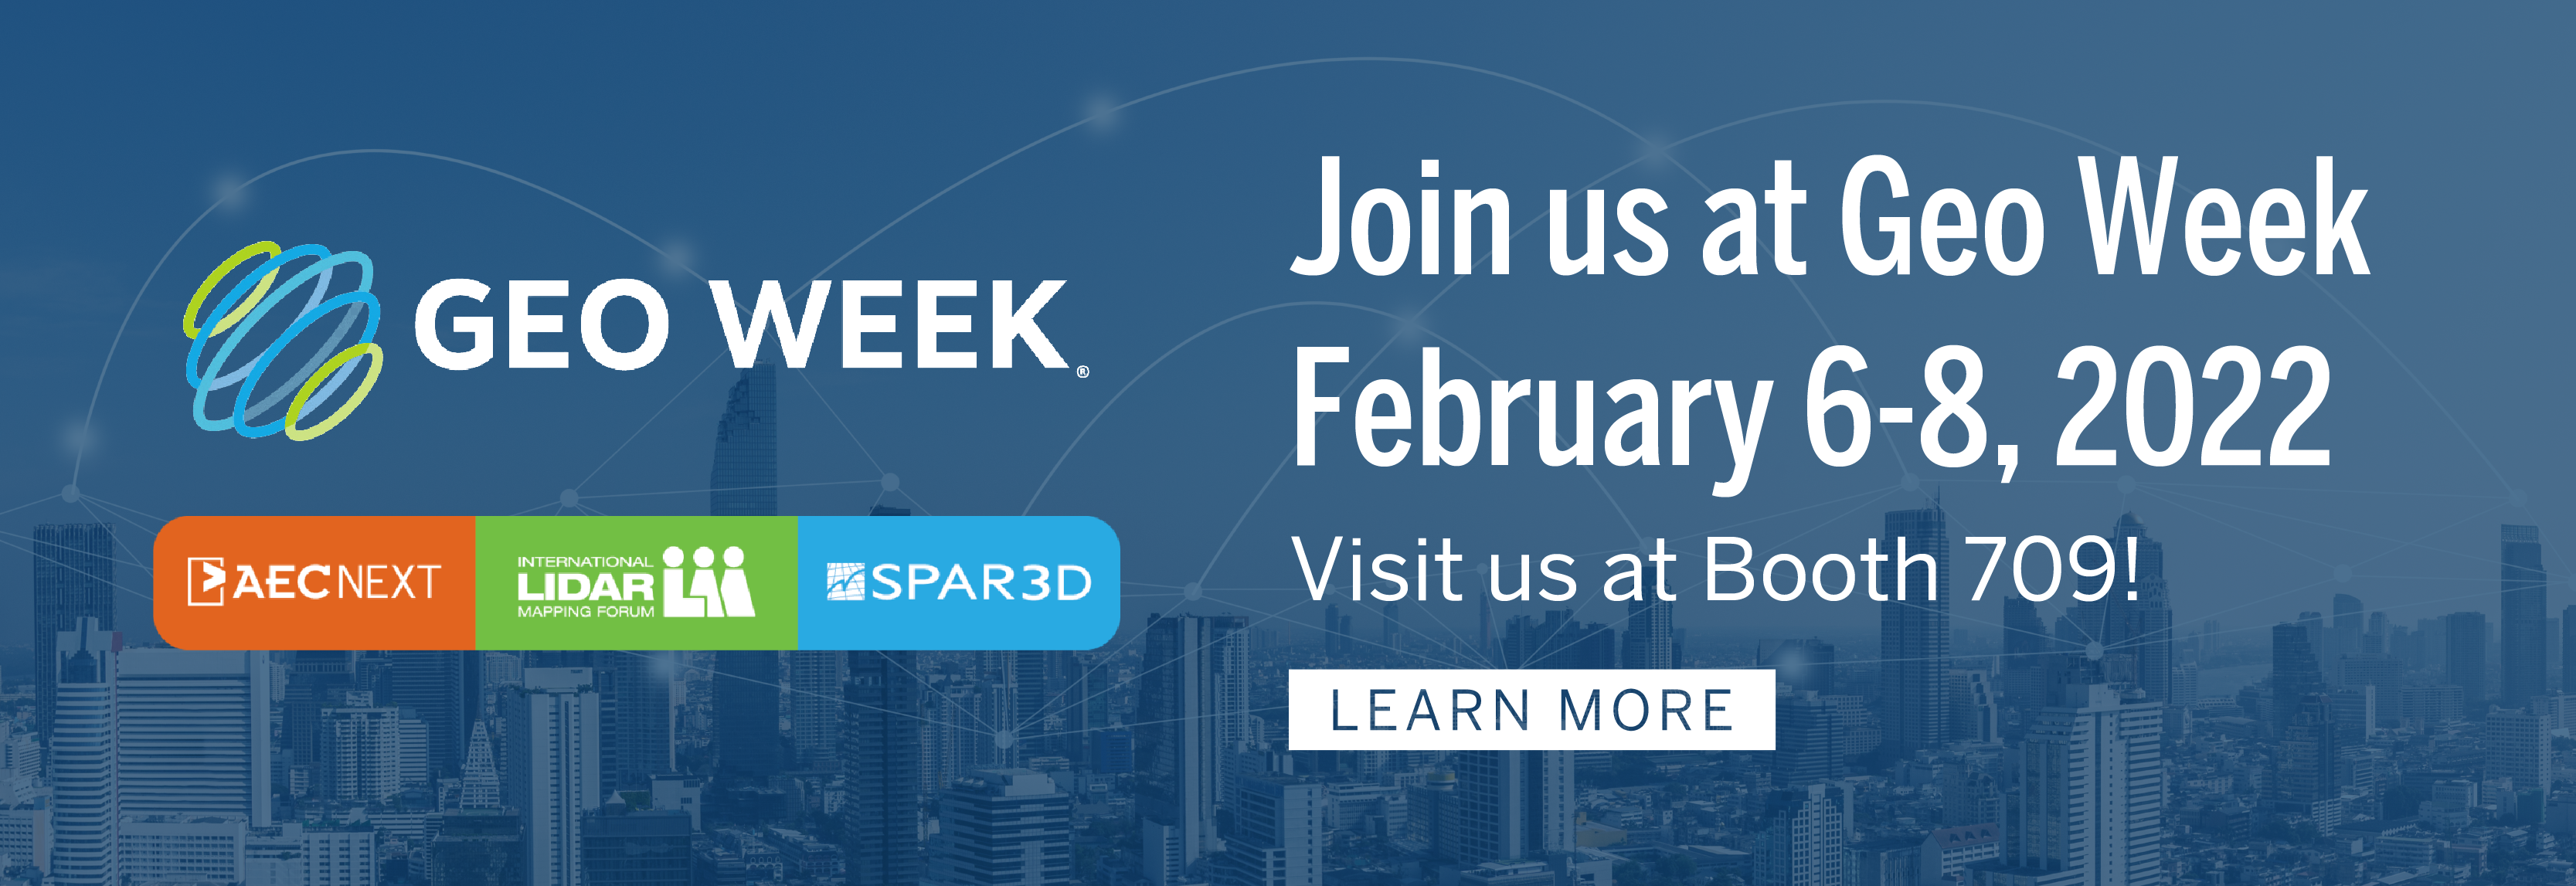 Join us at Geo Week on February 6-8, 2022 | Visit us at Booth 709! | Click to learn more!